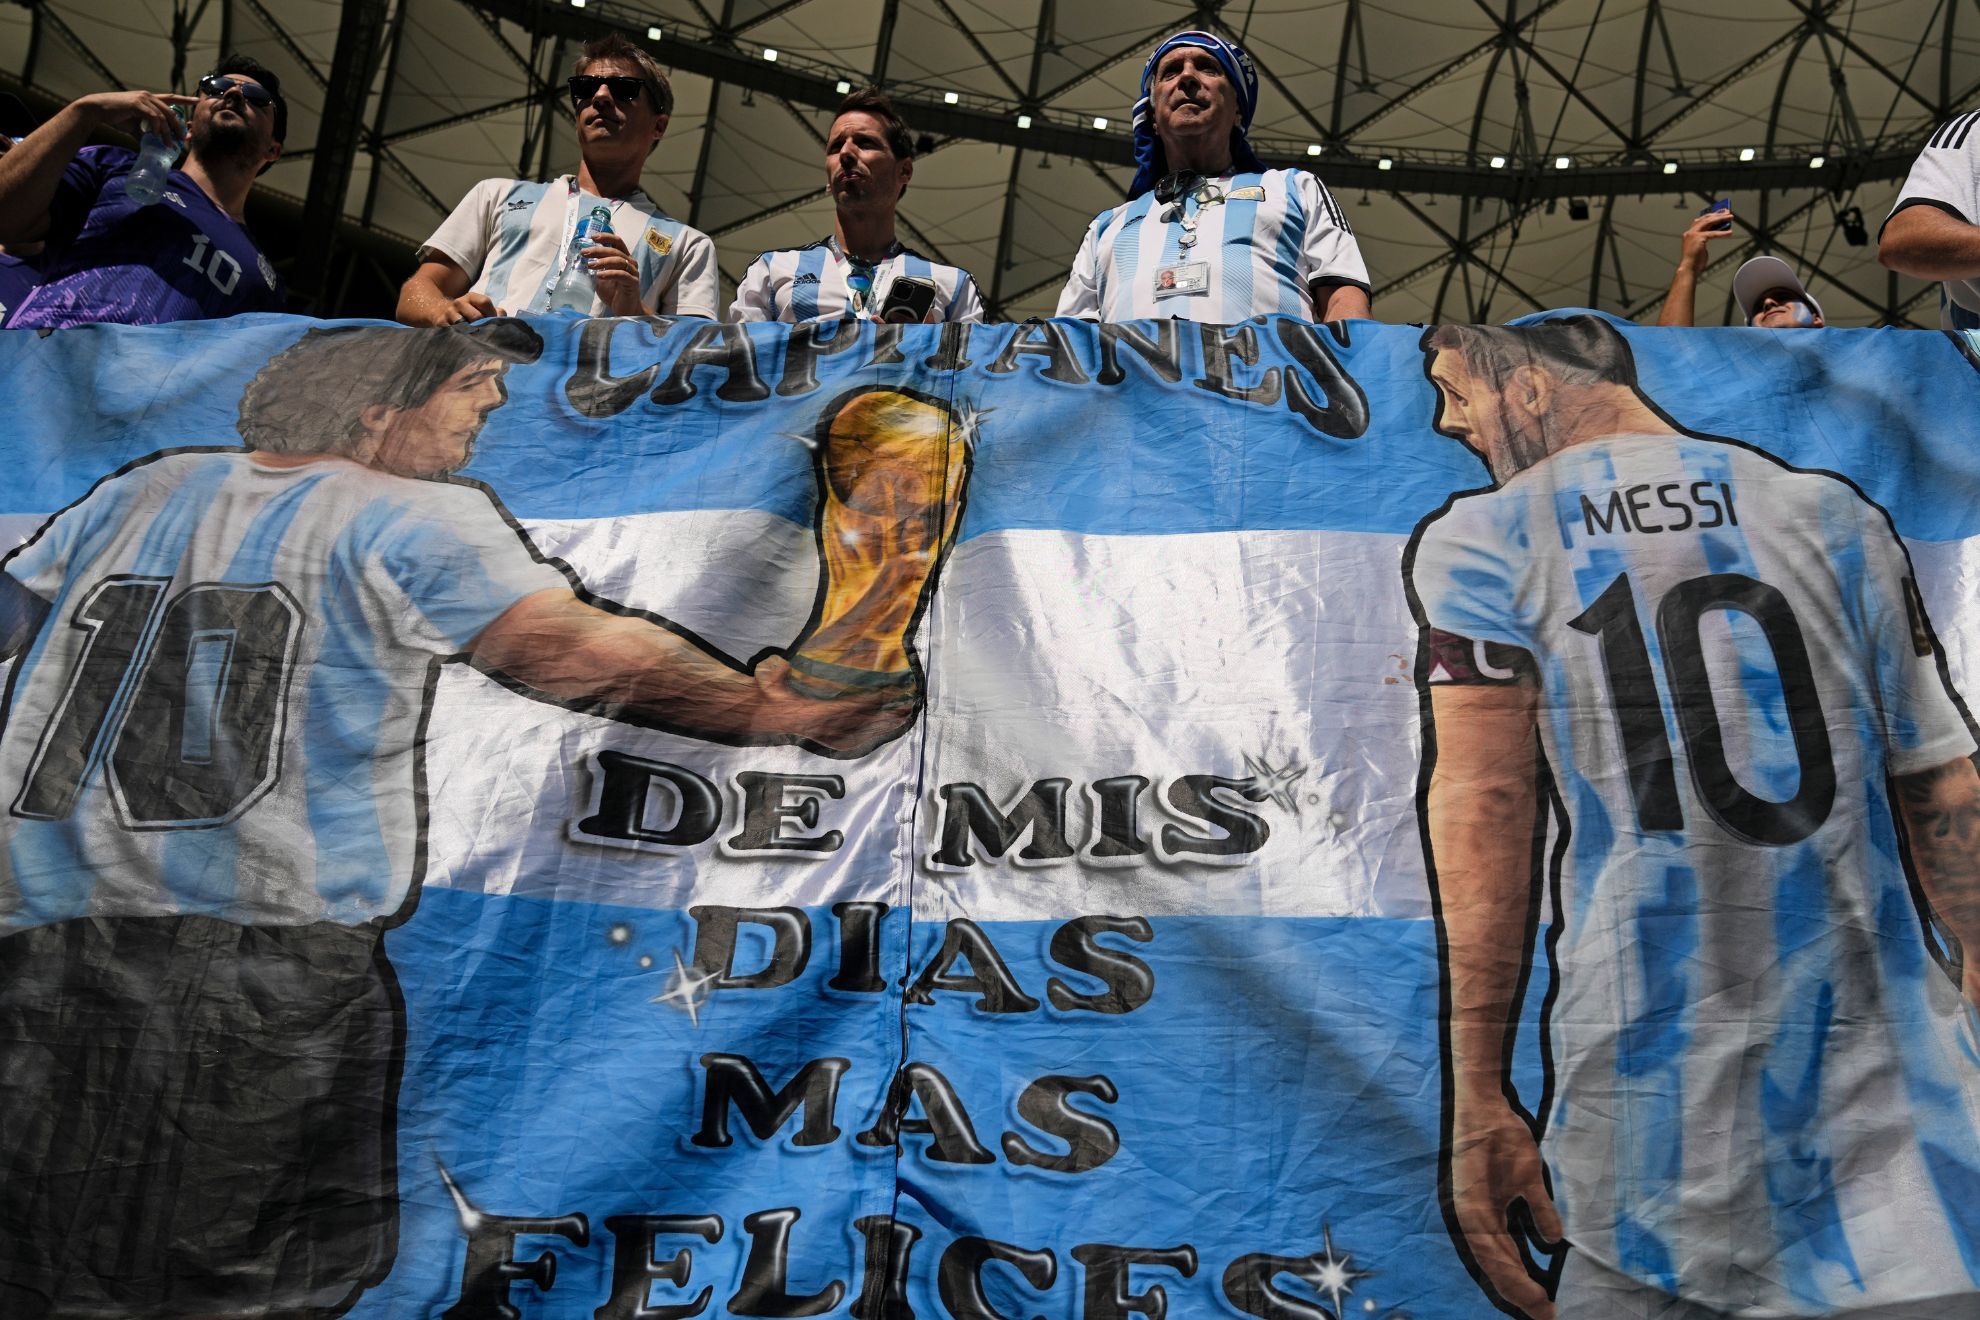 Diego Maradona (left) and Lionel Messi (right) on a banner